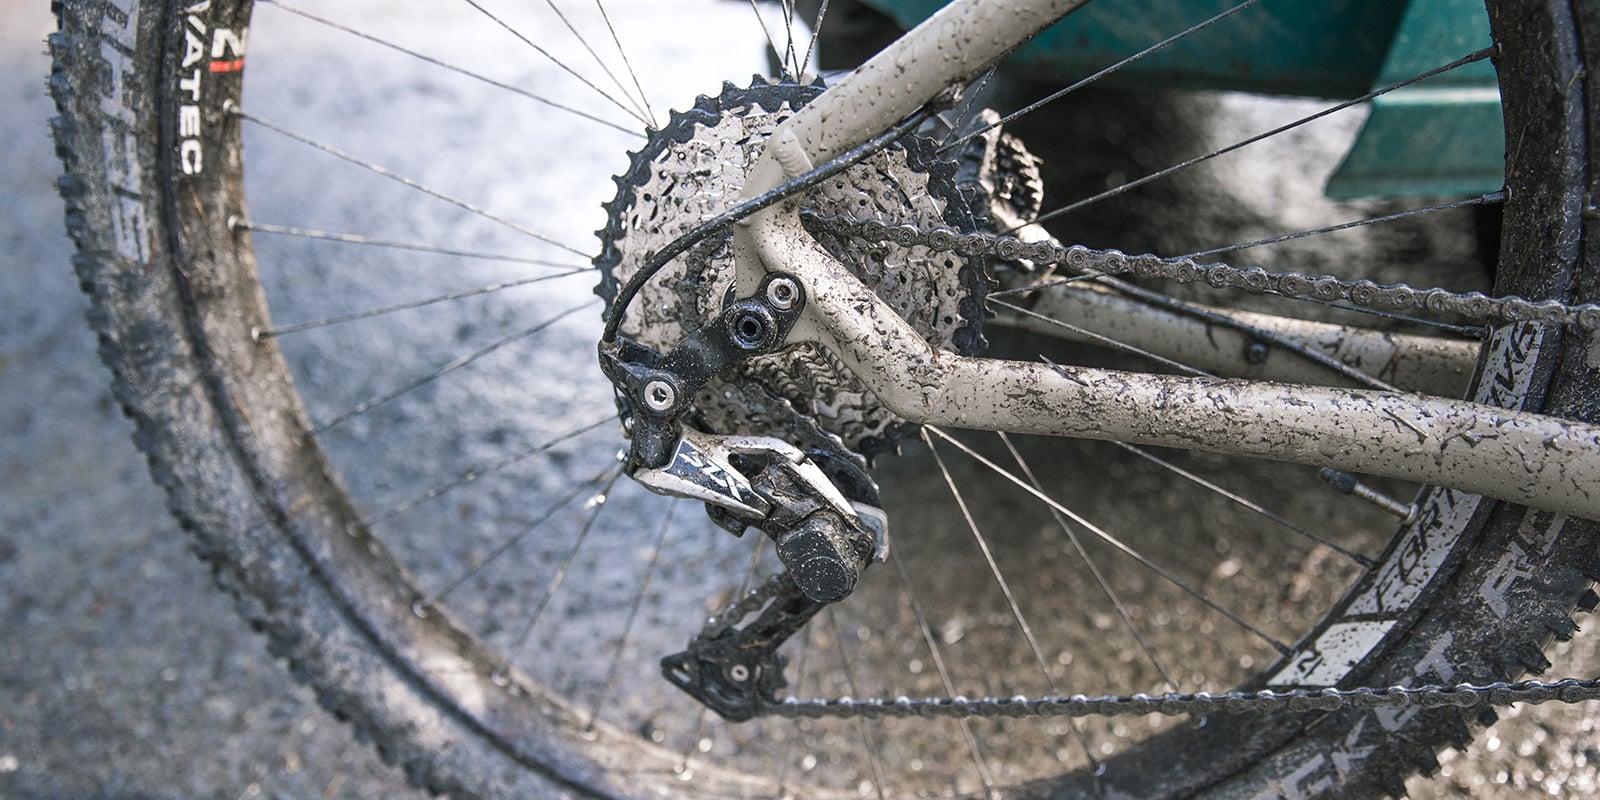 11 Speed Derailleur With 9 Speed Shifters: 4 Major Factors!